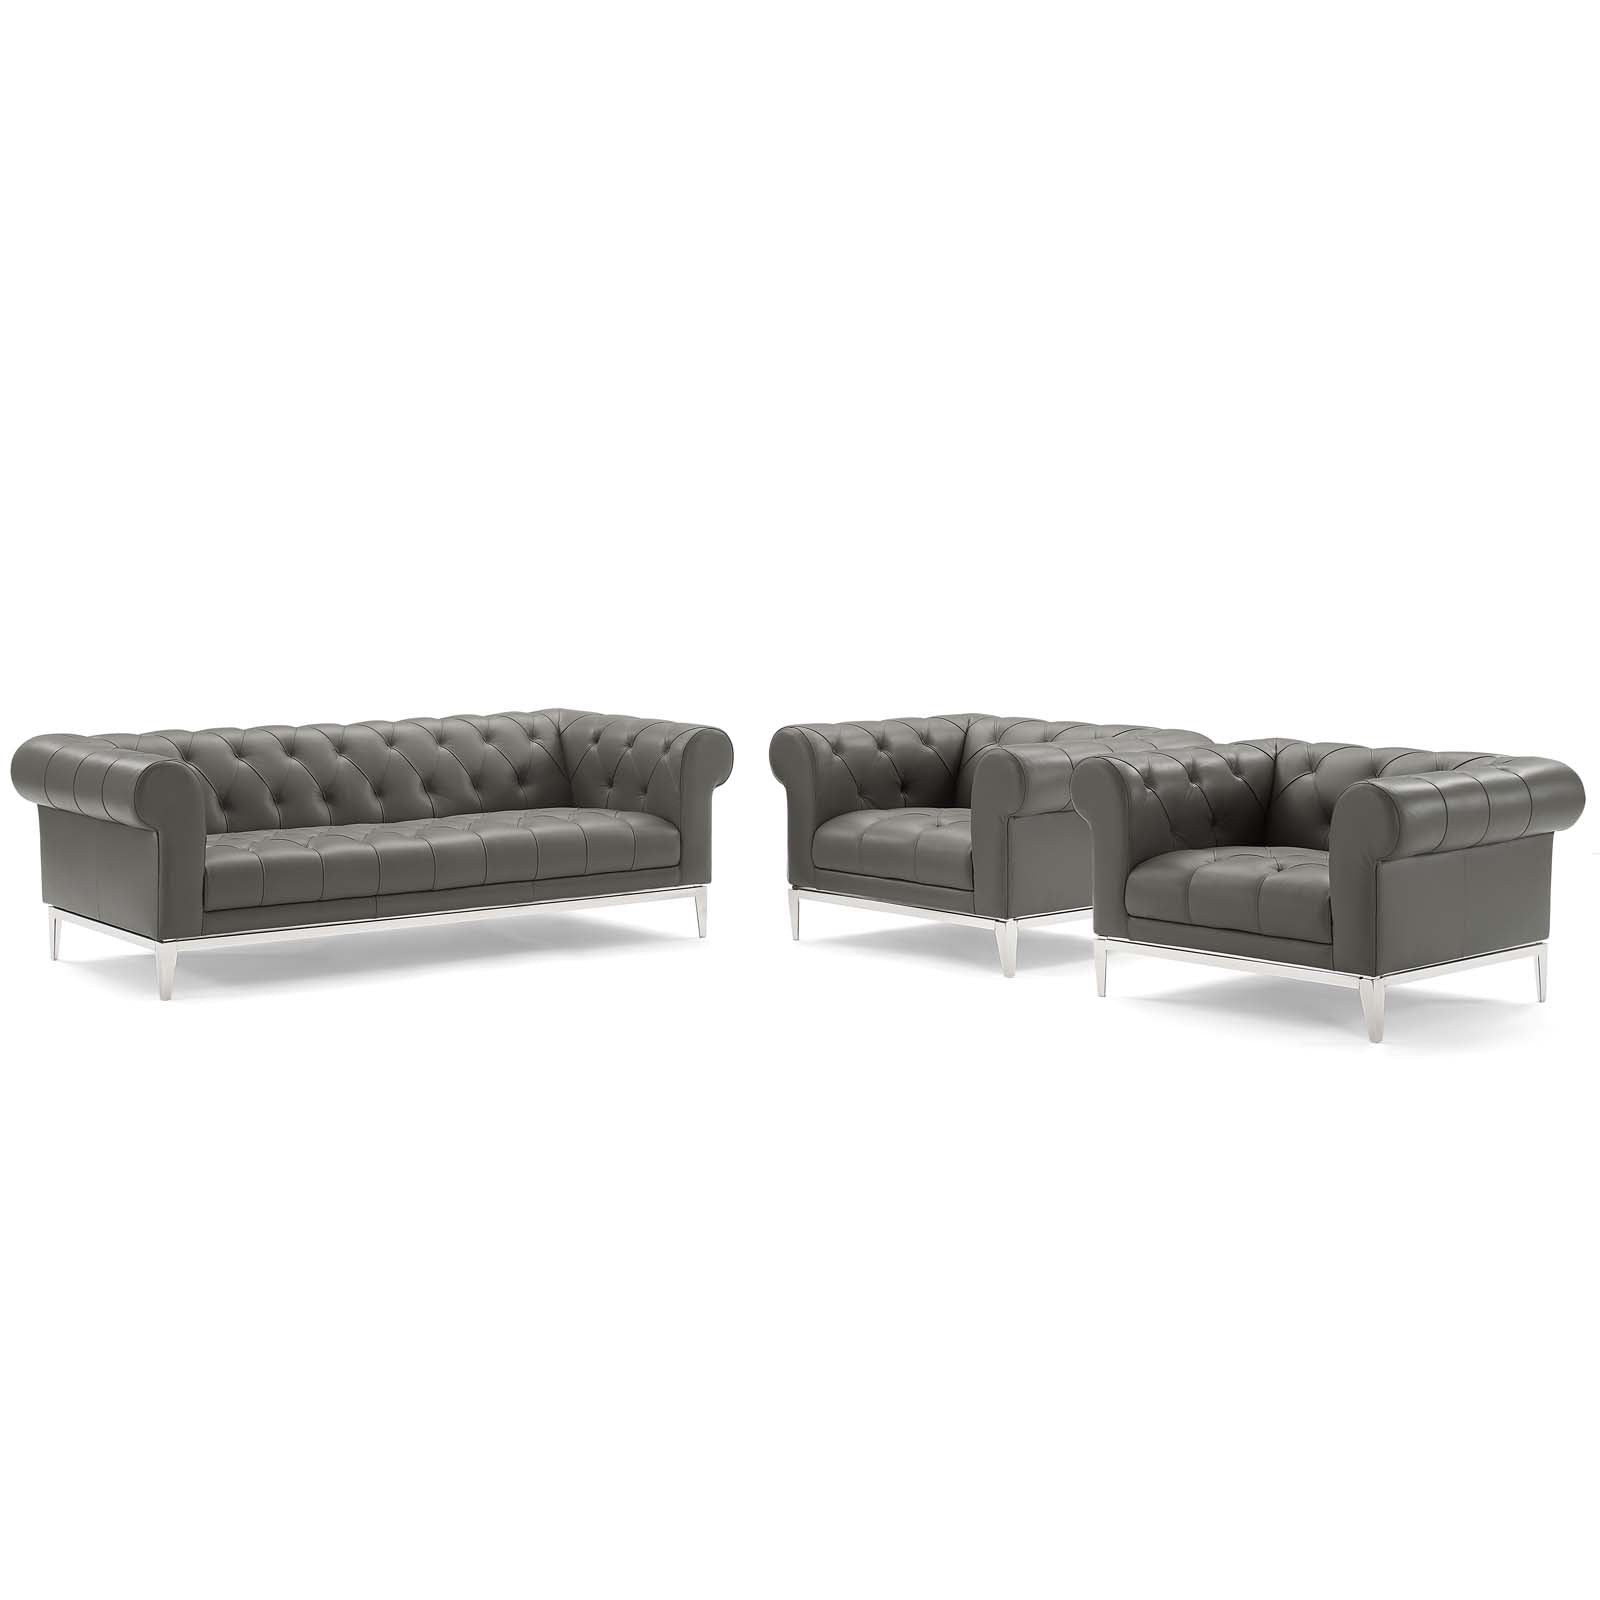 Idyll Tufted Upholstered Leather 3 Piece Set